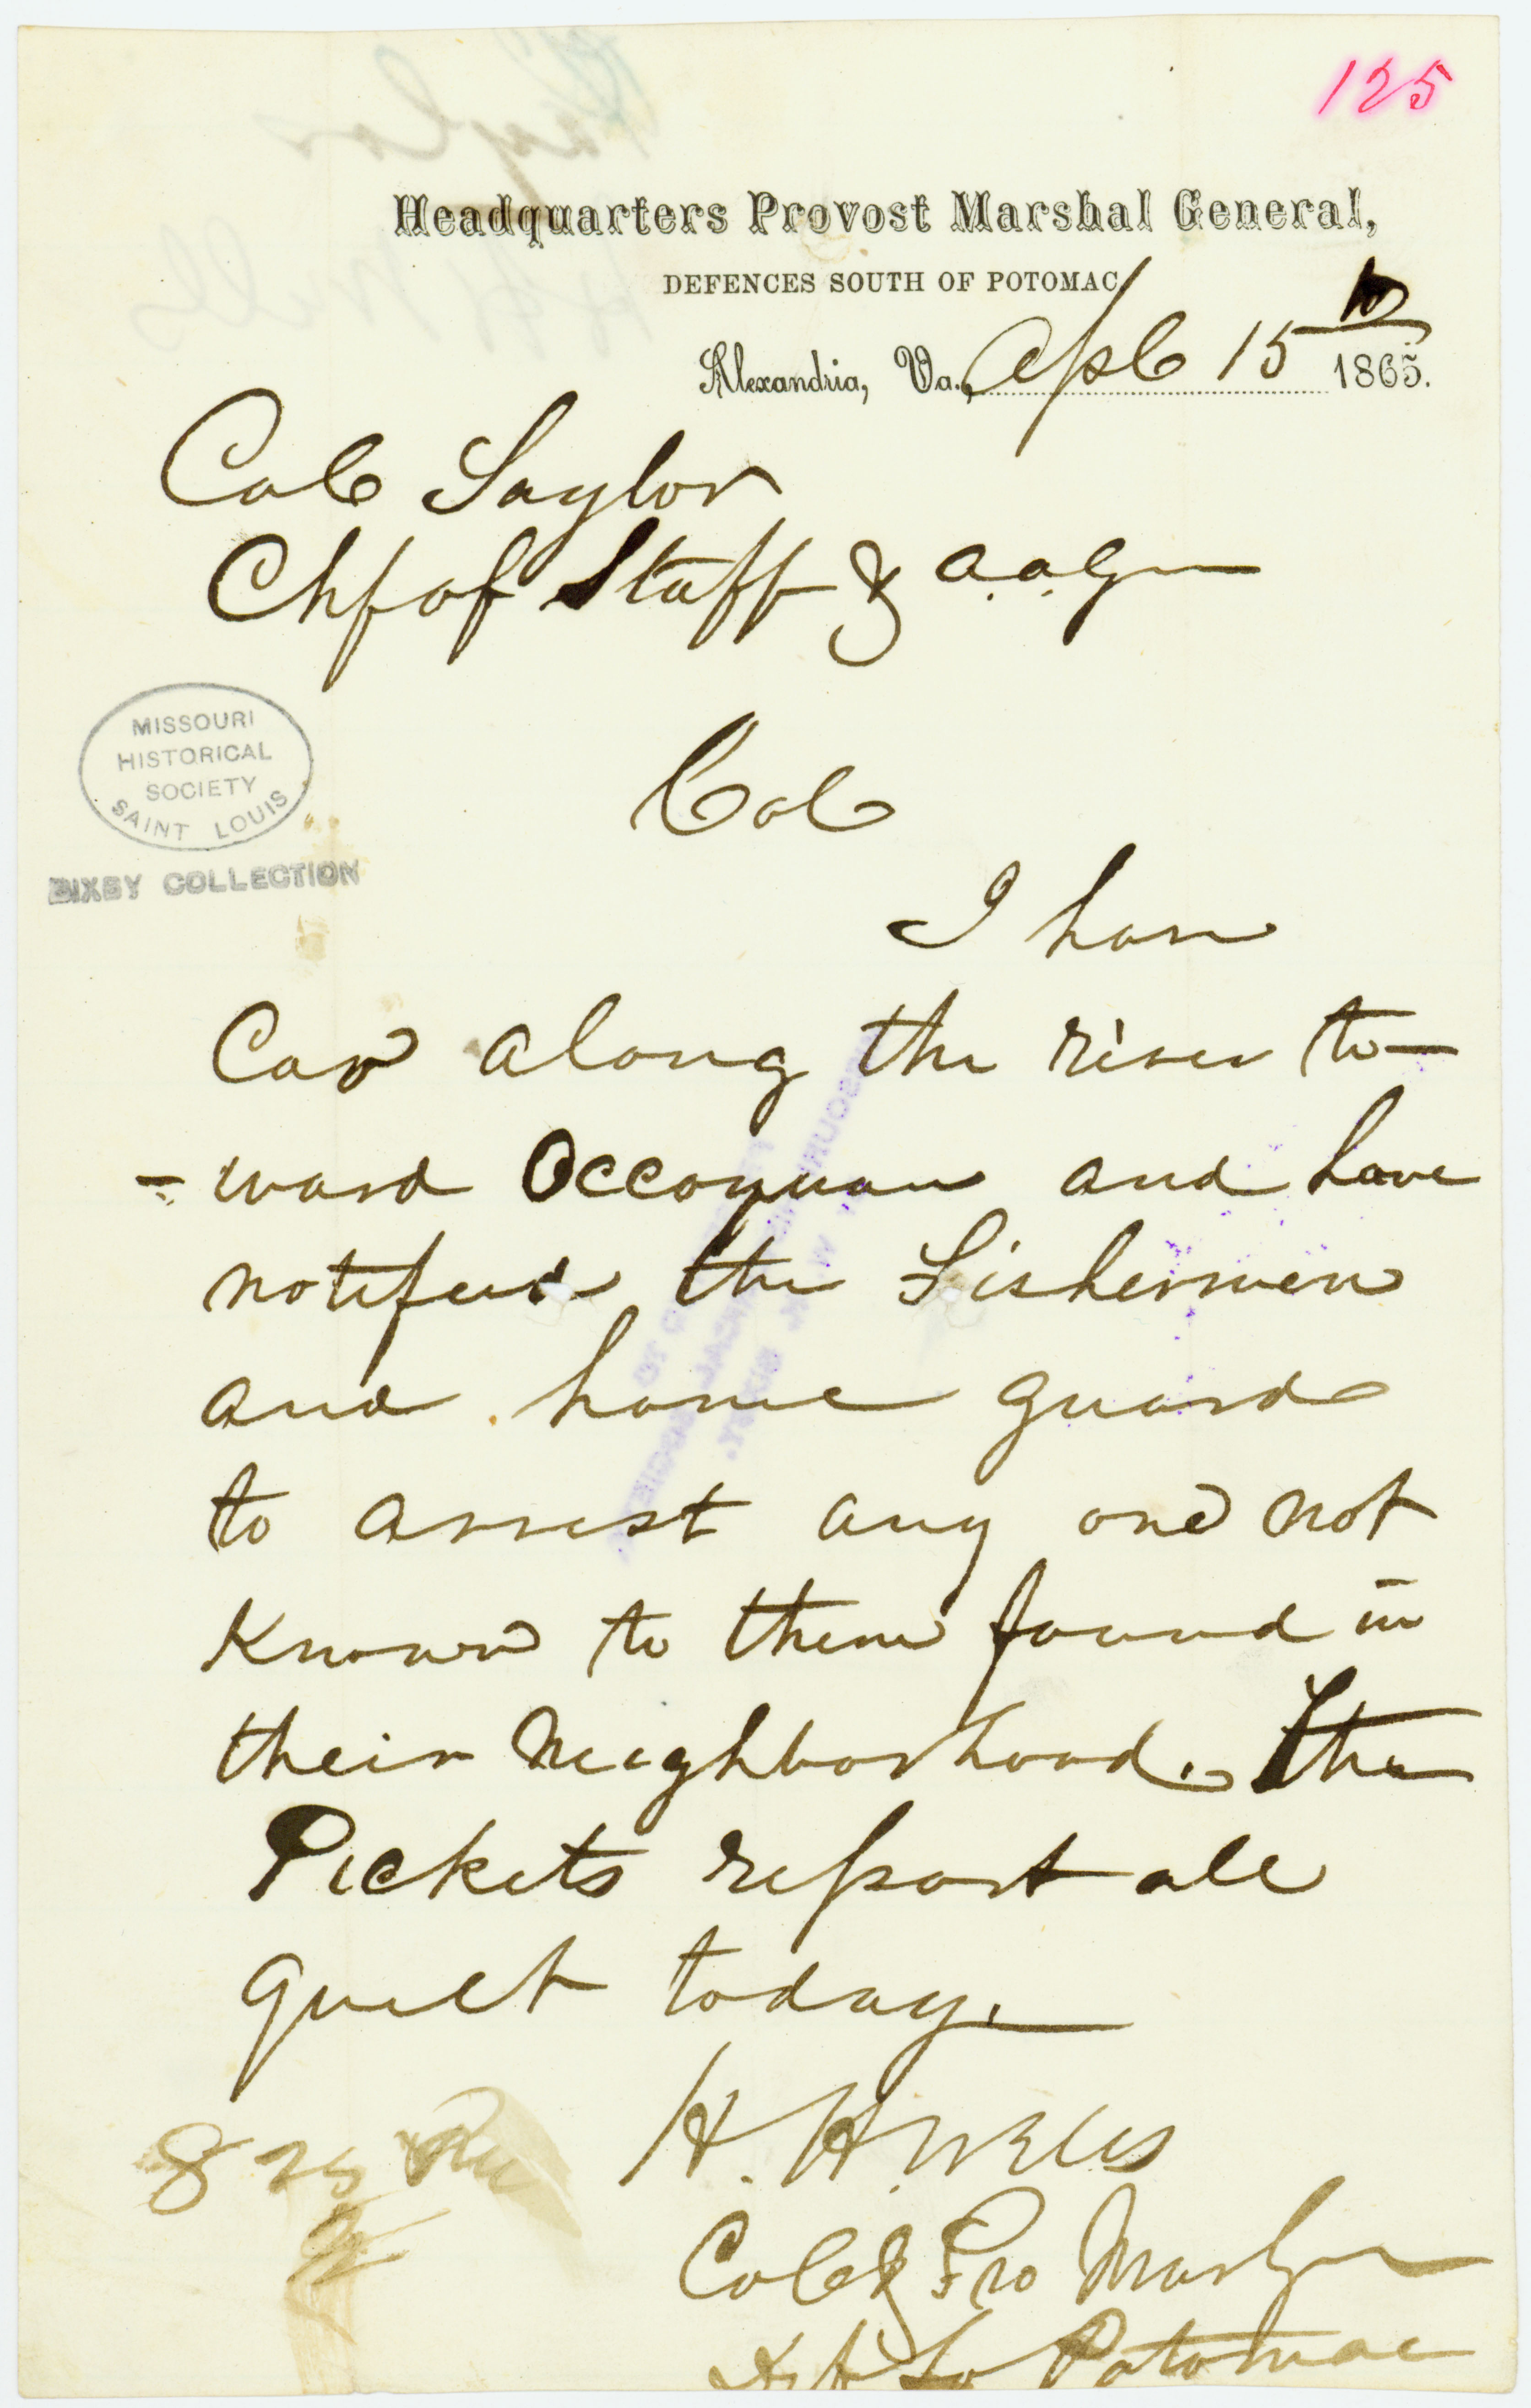 Contemporary copy of telegram of H. H. Wells, Headquarters Provost Marshal General, Defences South of Potomac, Alexandria, Va., to Cole Taylor, Chf. of Staff and A.A.G., April 15, 1865